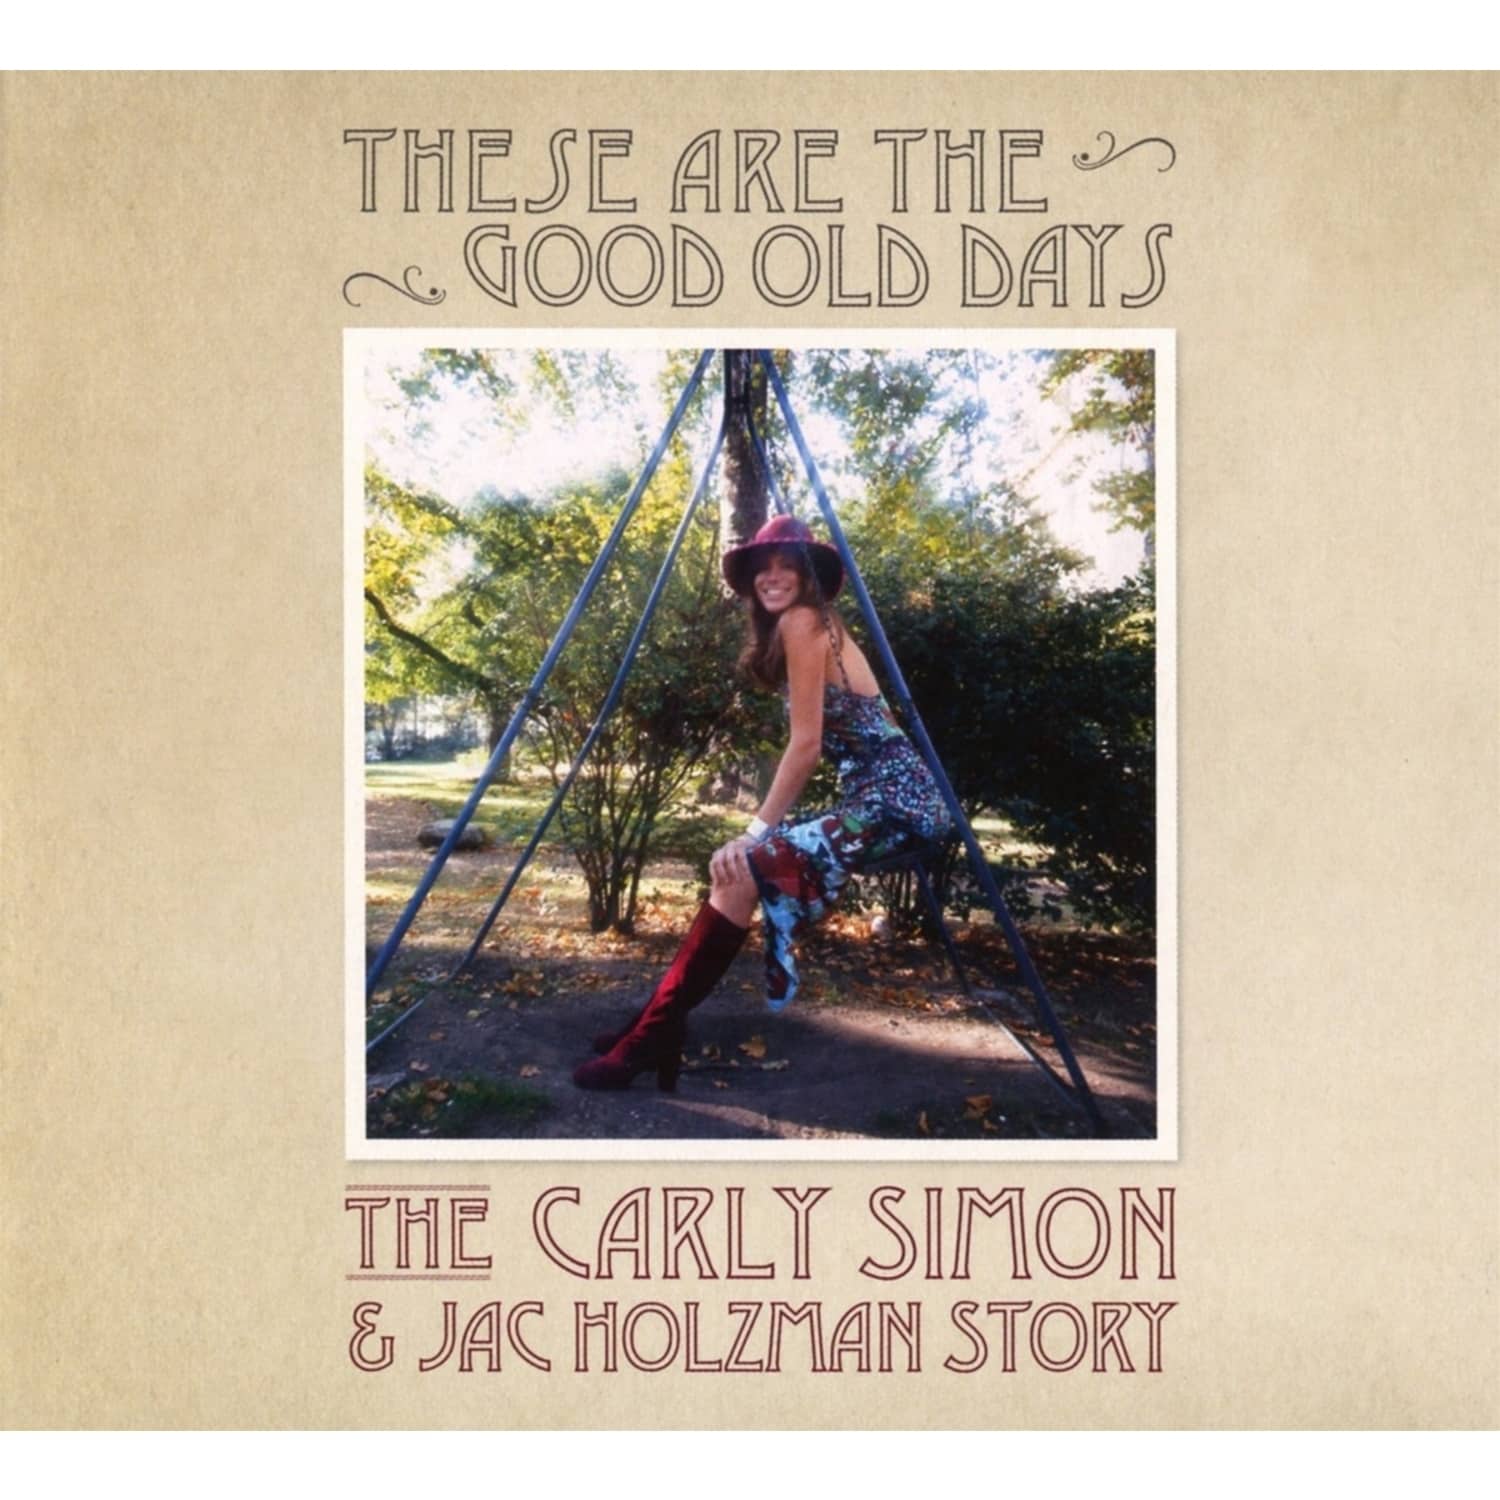 Carly Simon - THESE ARE THE GOOD OLD DAYS: 